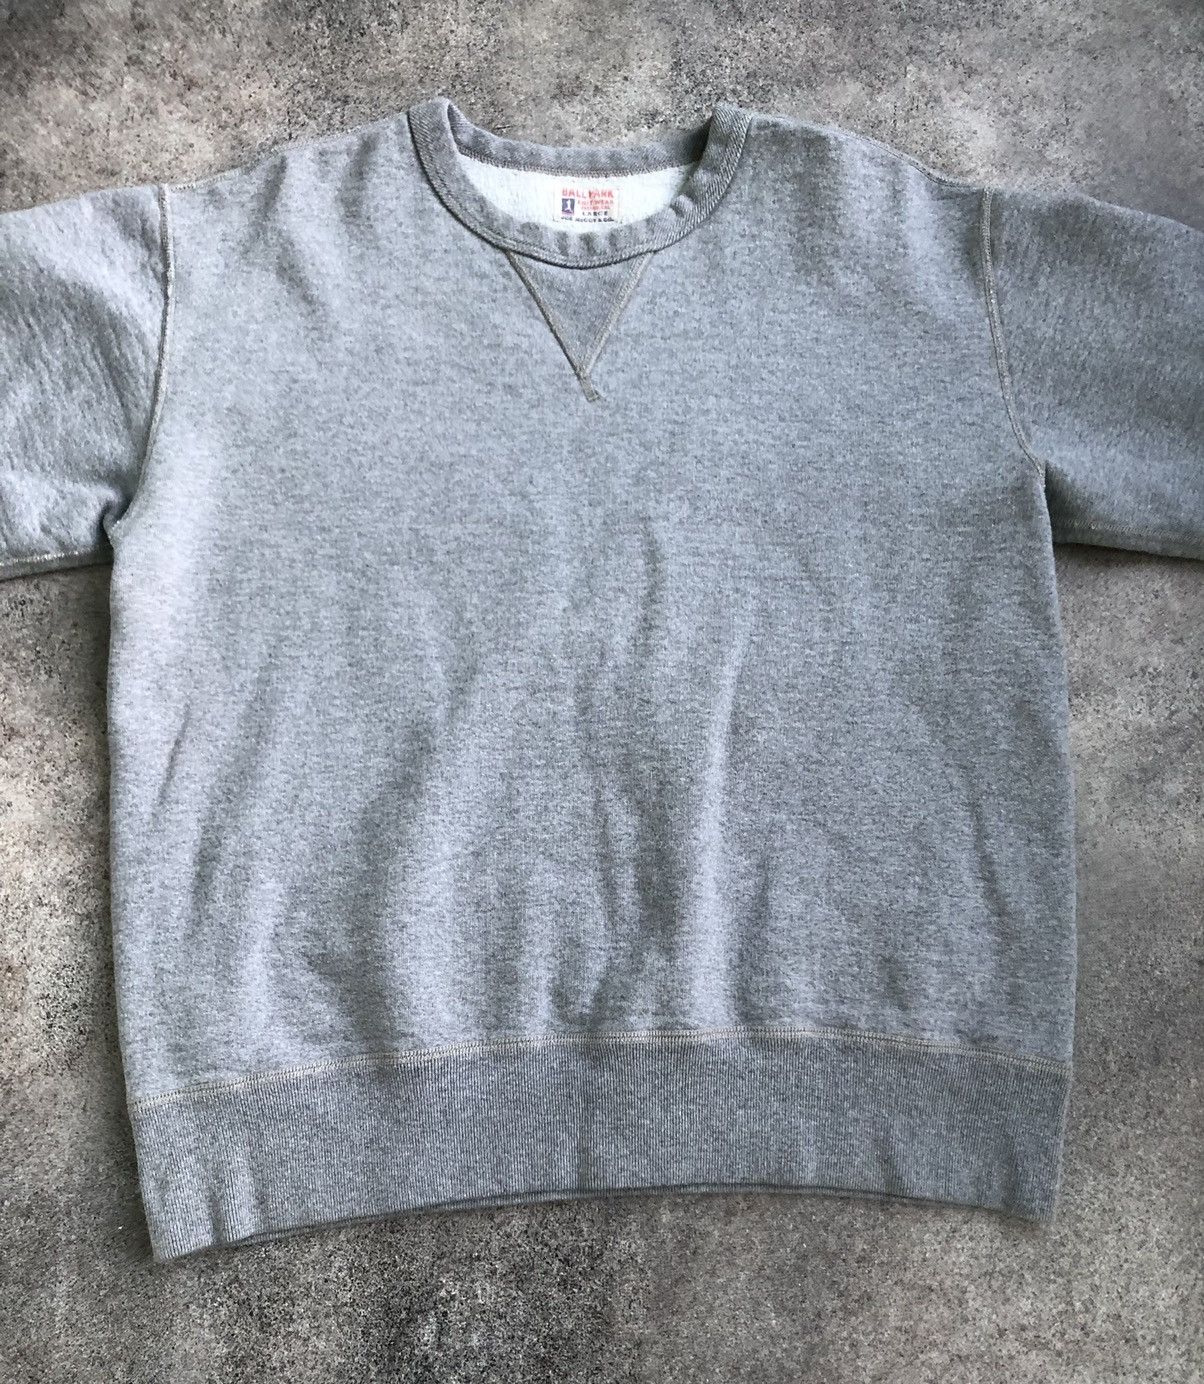 The Real McCoy's The Real McCoy’s loopwheel grey sweatshirt Size US L / EU 52-54 / 3 - 2 Preview